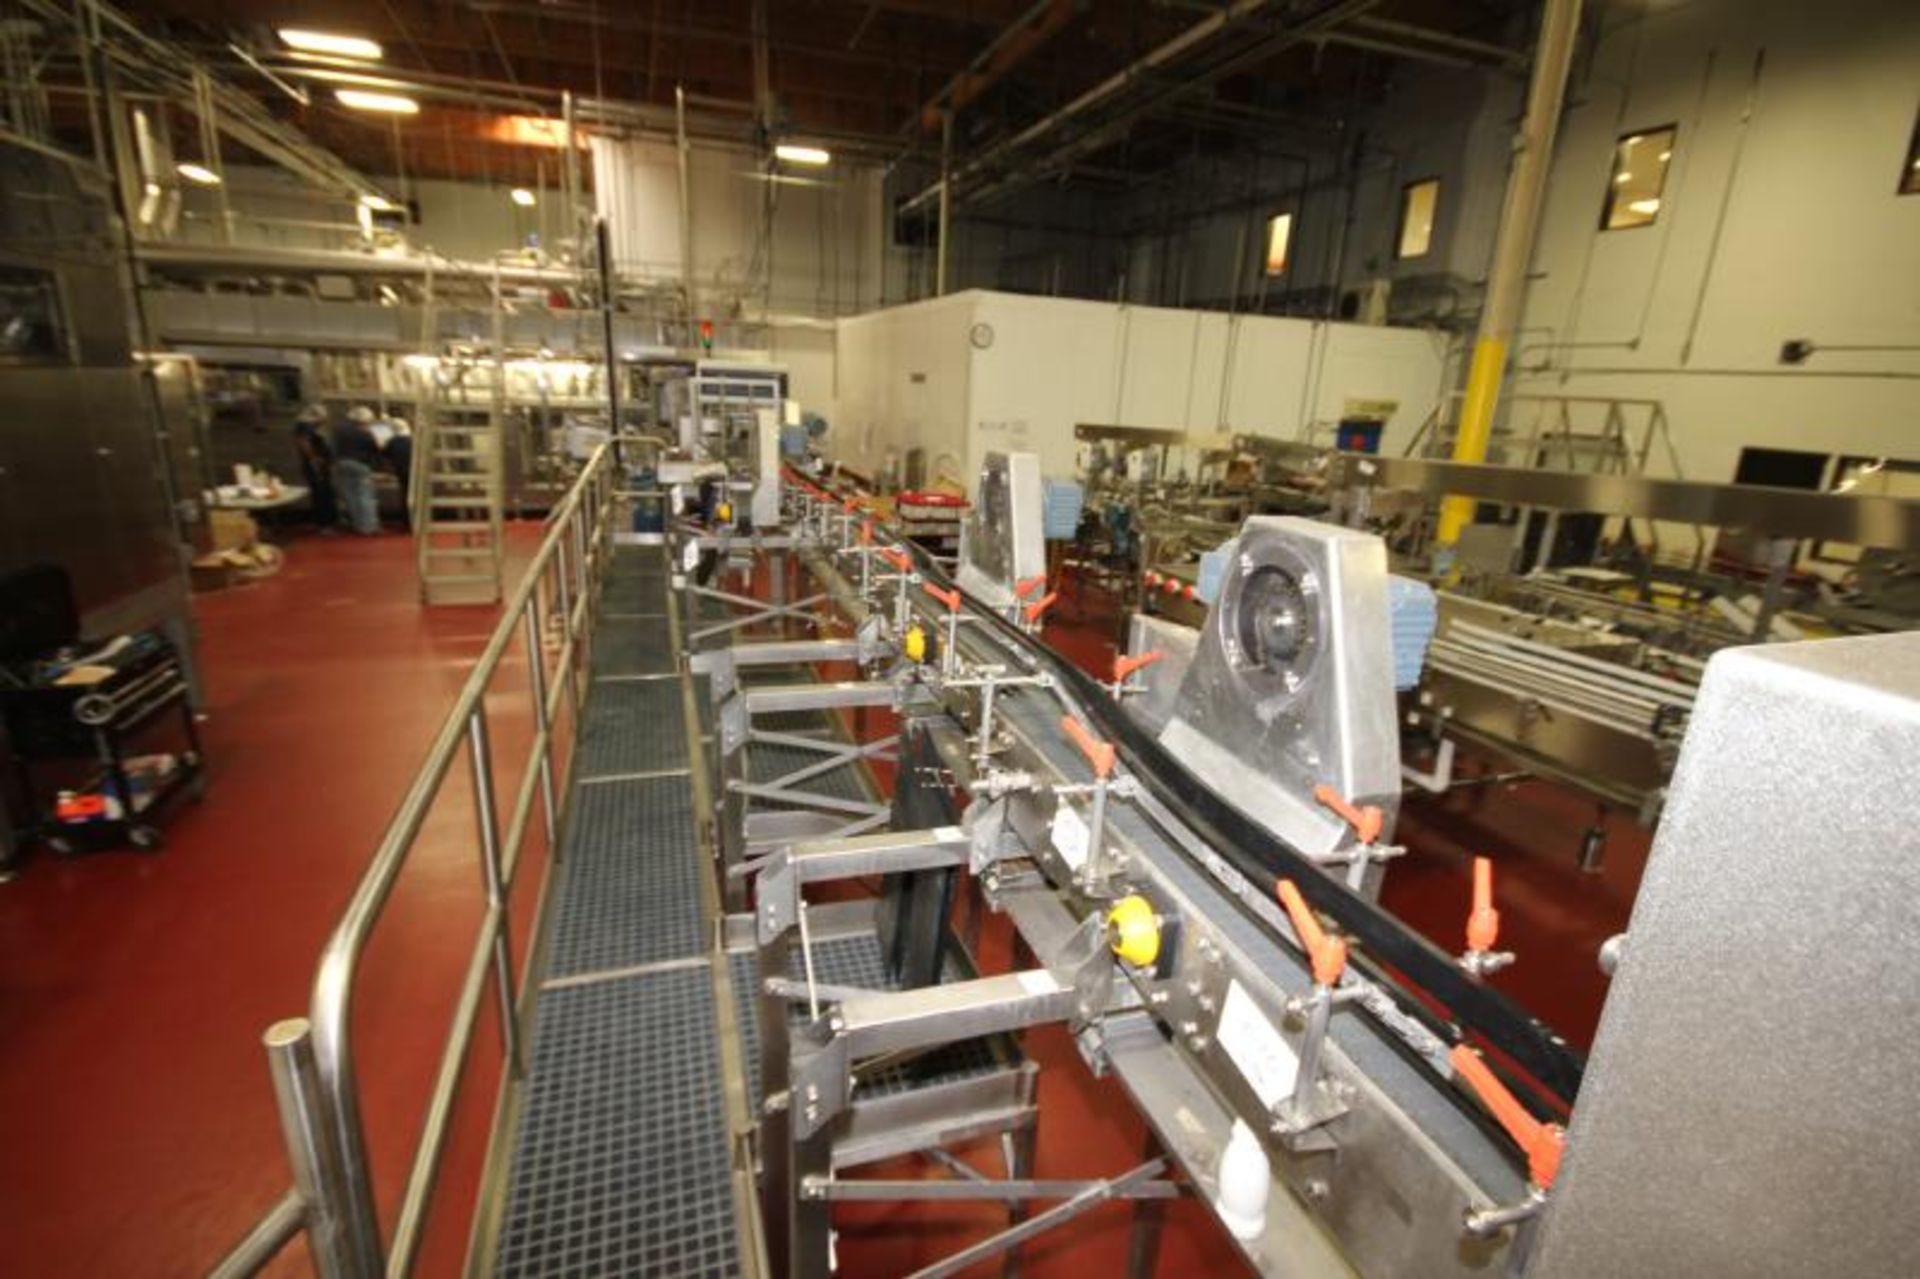 Sentry Aprox. 200' S/S Bottle and Product Conveyor System, Single Filer Section, 7-Bank Control - Image 4 of 6